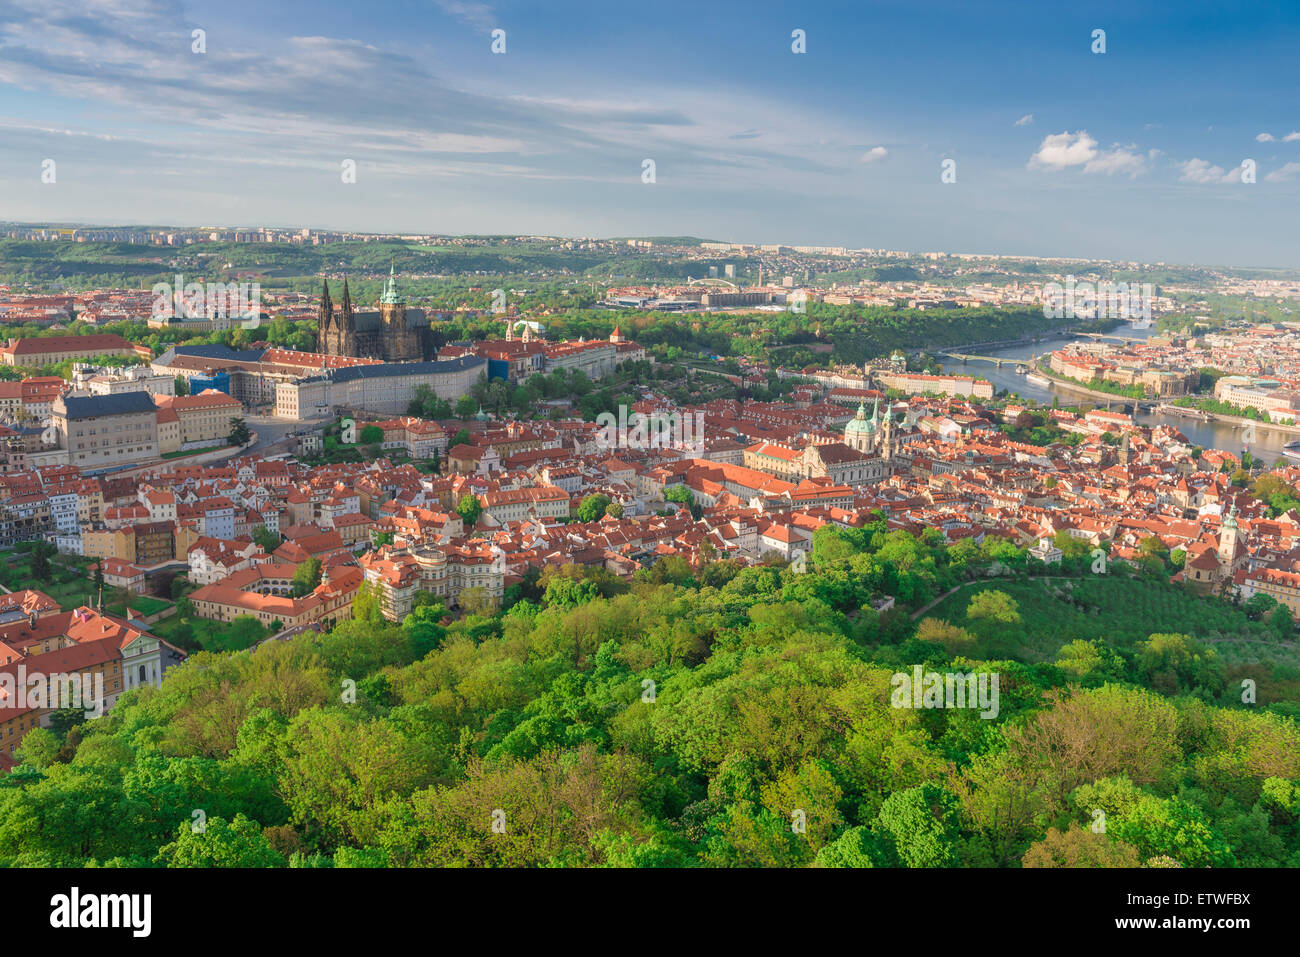 Hradcany Prague, view of the Hradcany district in Prague from the heights of the city's largest park - the Petrin, Czech Republic. Stock Photo